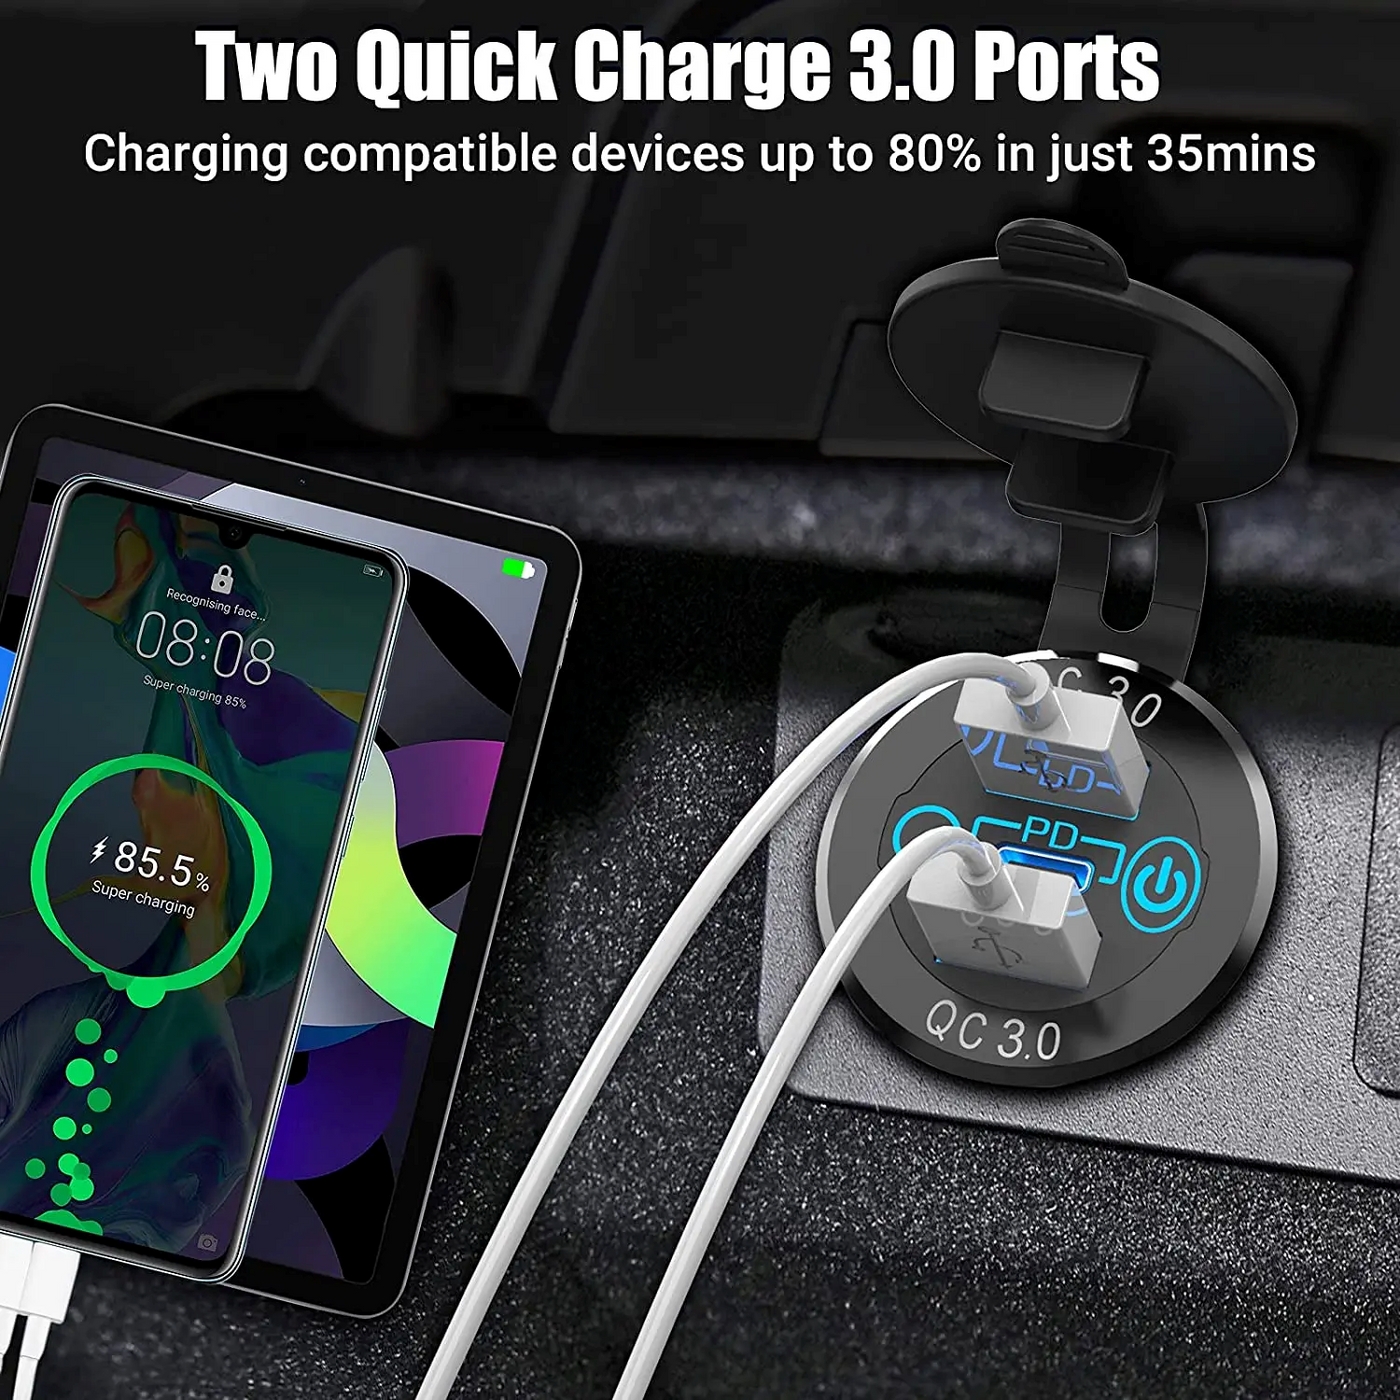 DS2013-P13 USB Charger with Two Quick Charge 3.0 Ports